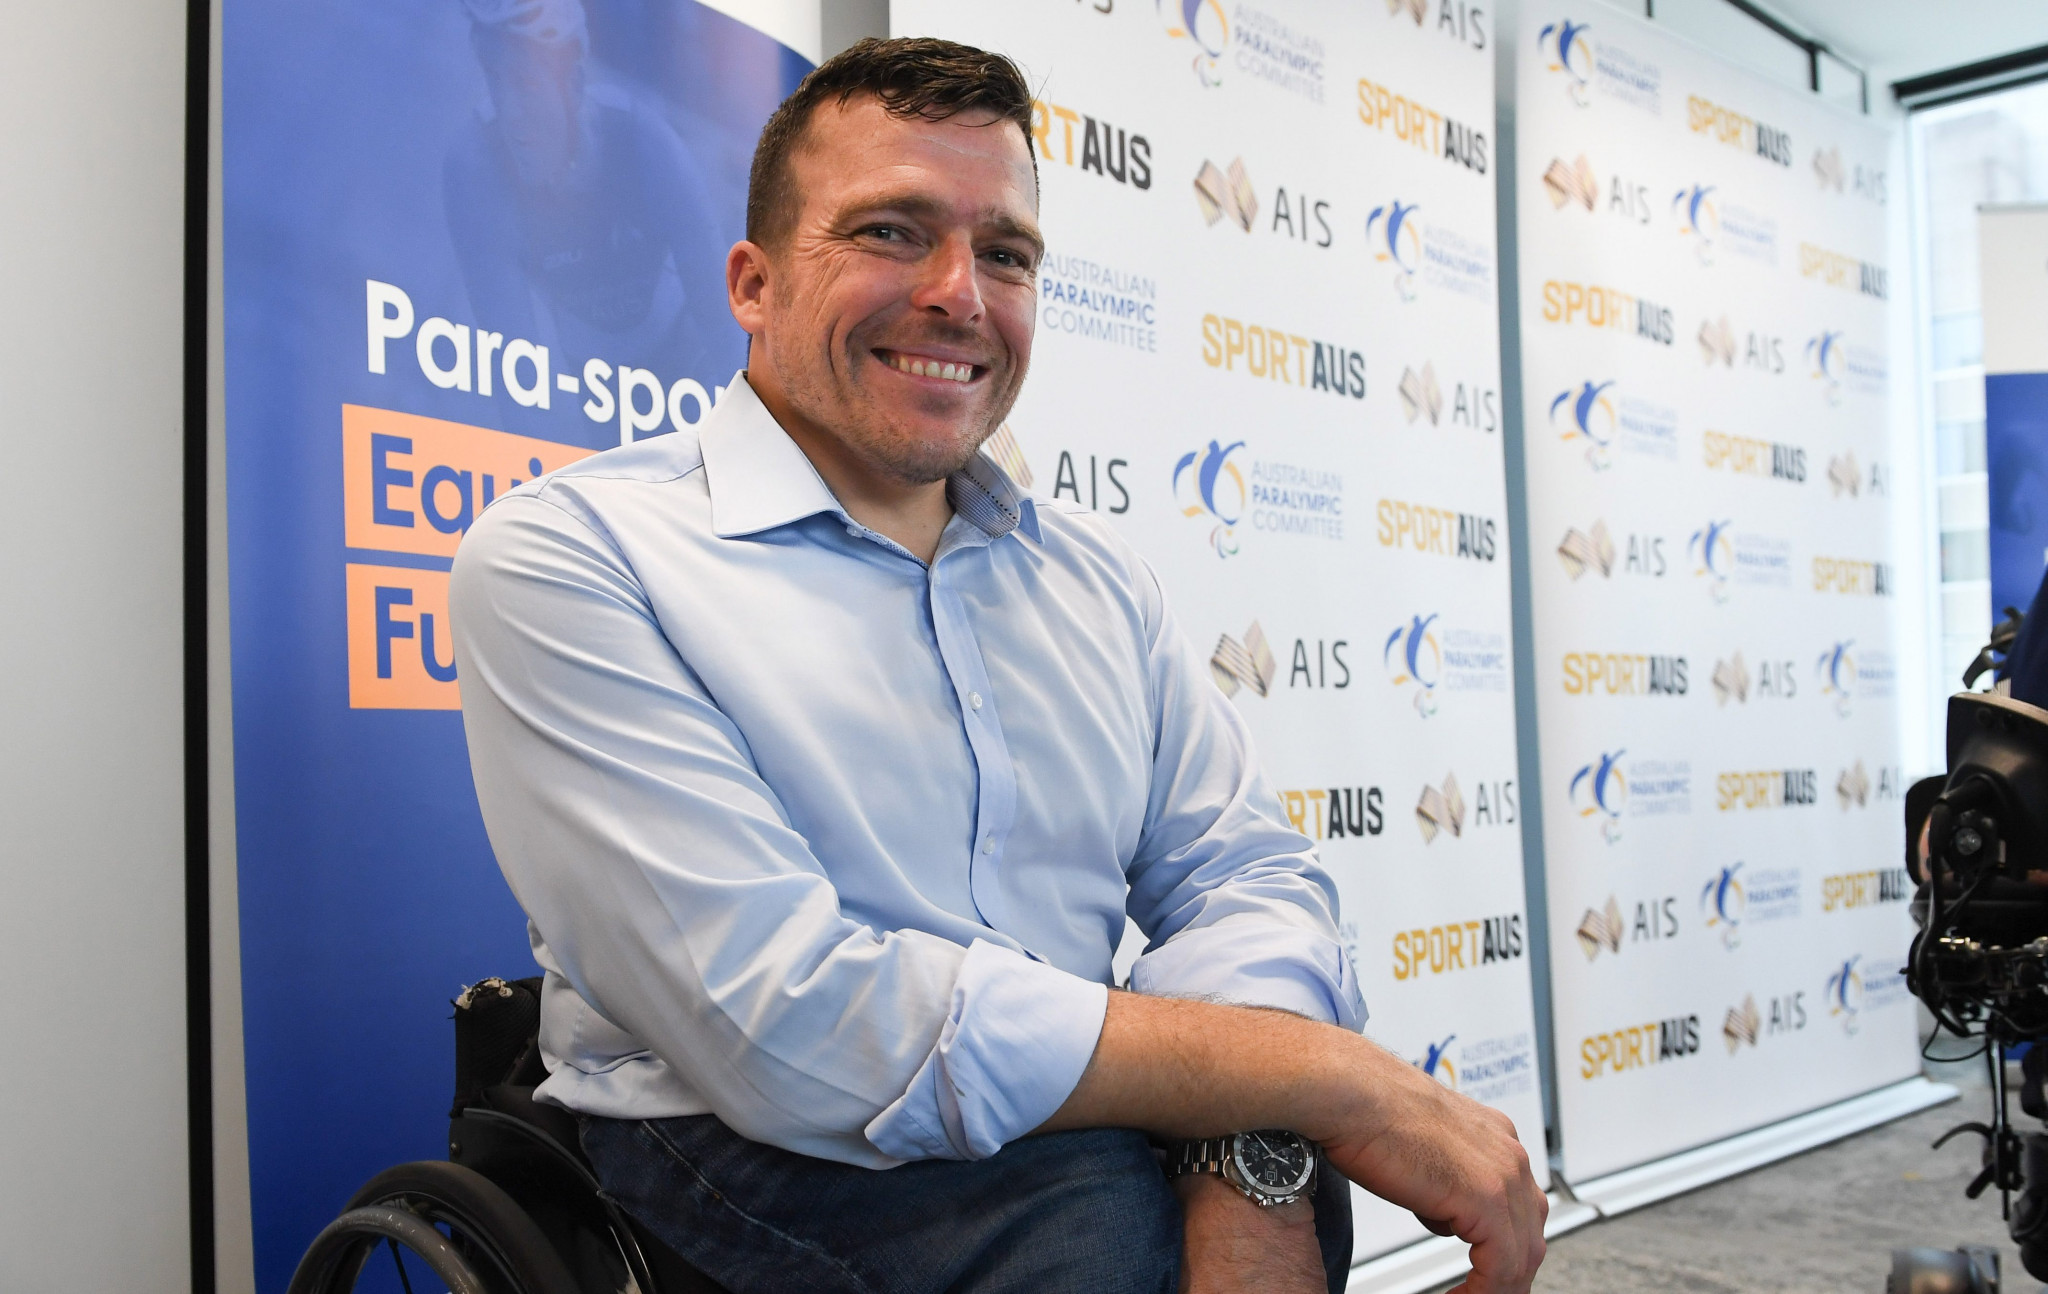 The donation was facilitated by five-time Paralympian and Paralympics Australia Board member Kurt Fearnley ©Paralympics Australia